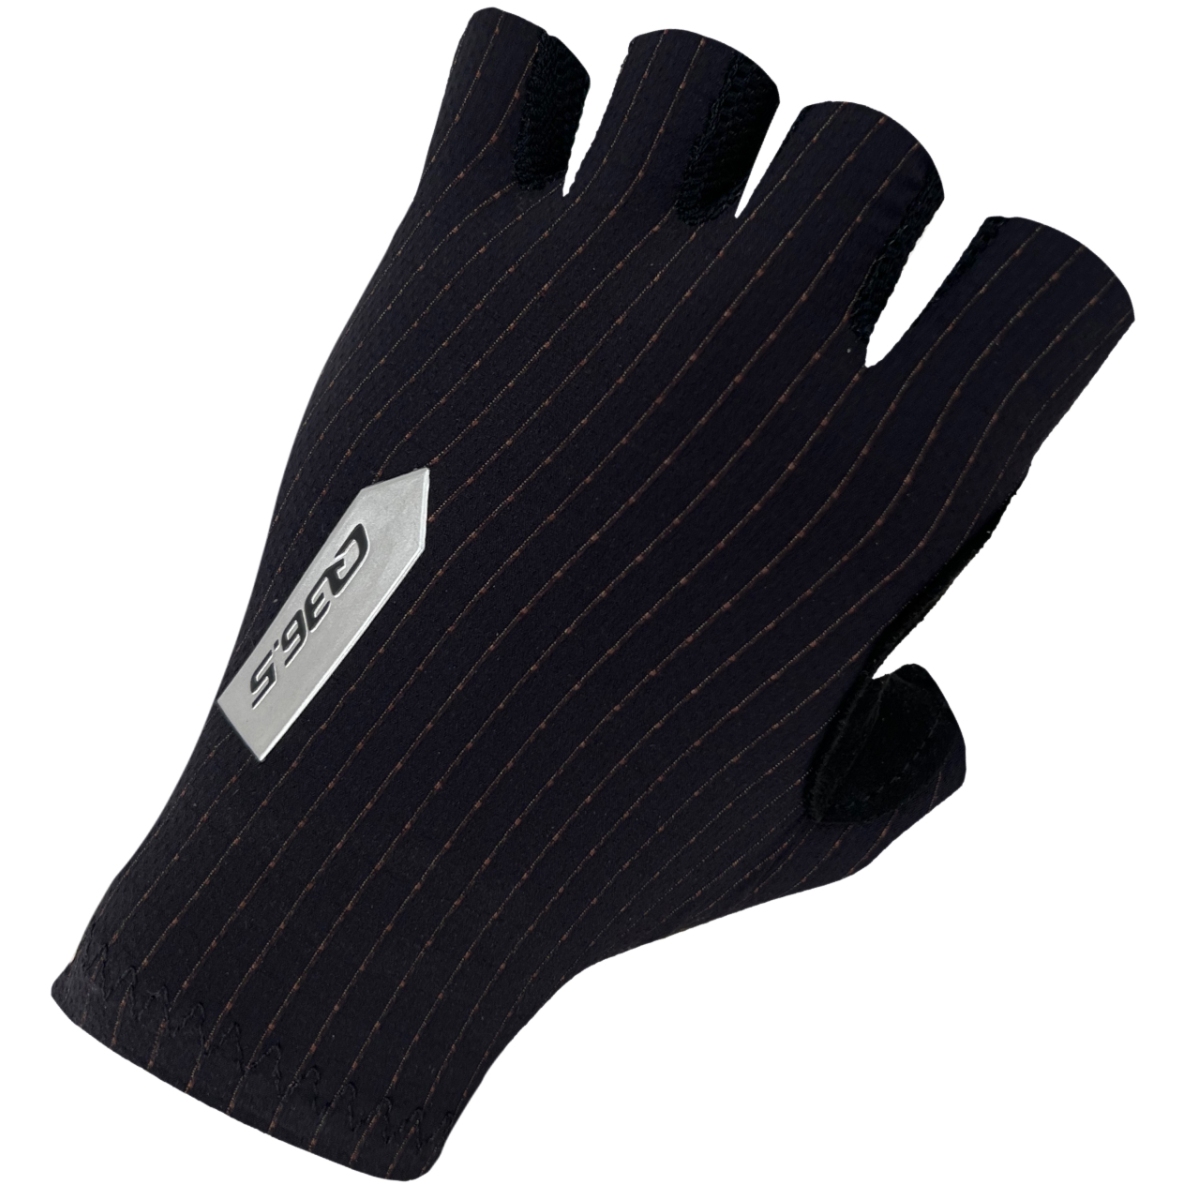 Image of Q36.5 Pinstripe Summer Cycling Gloves - black